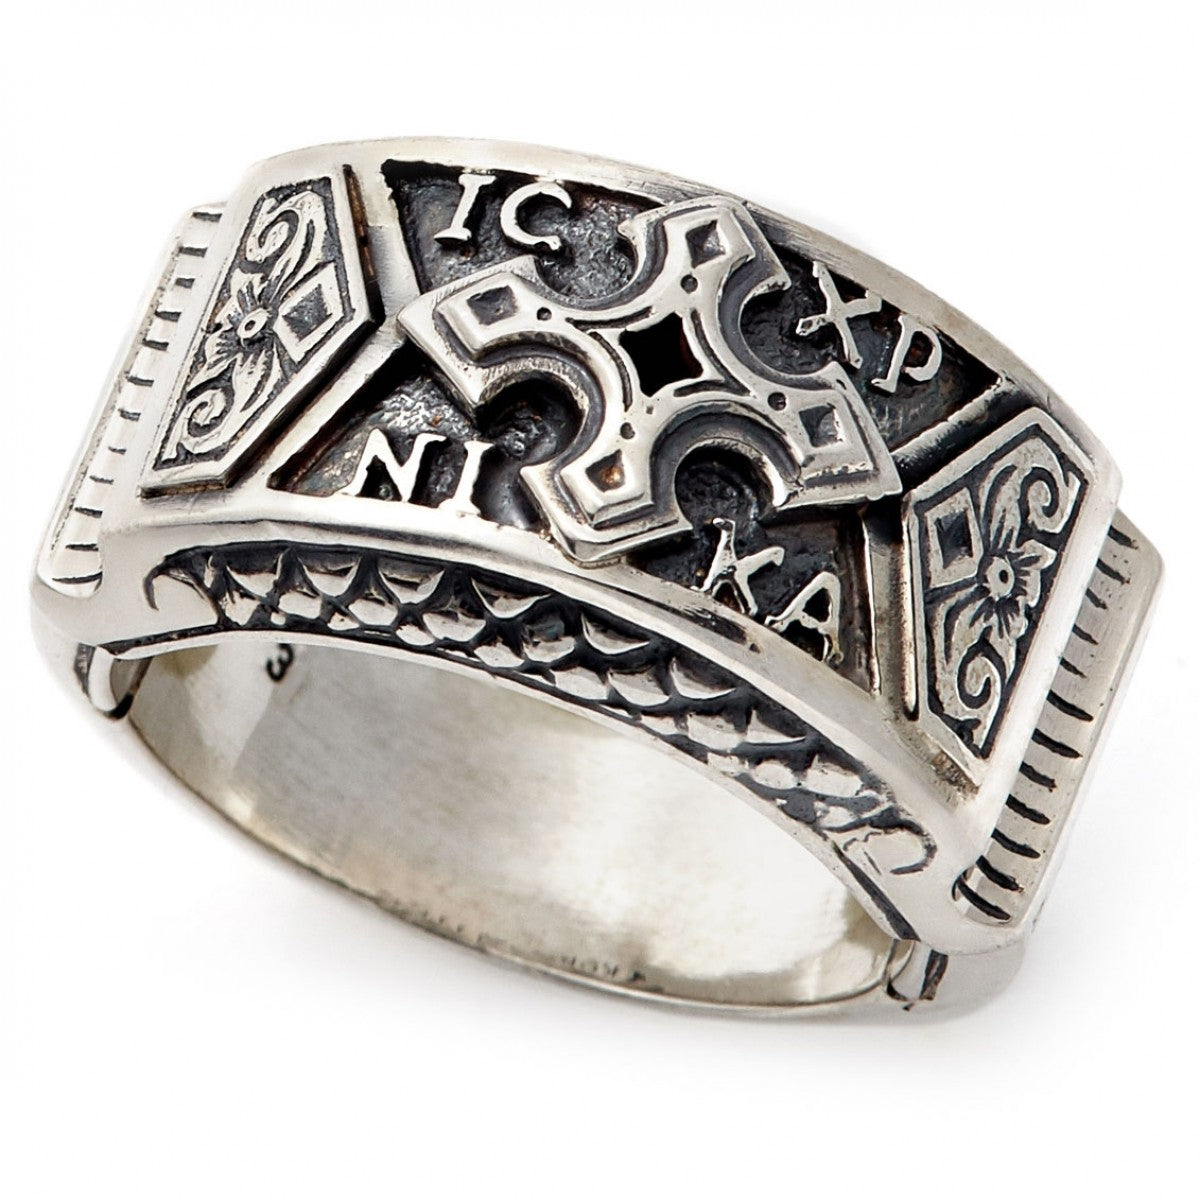 Konstantino Men's Sterling Silver Ring With Intricate Designs